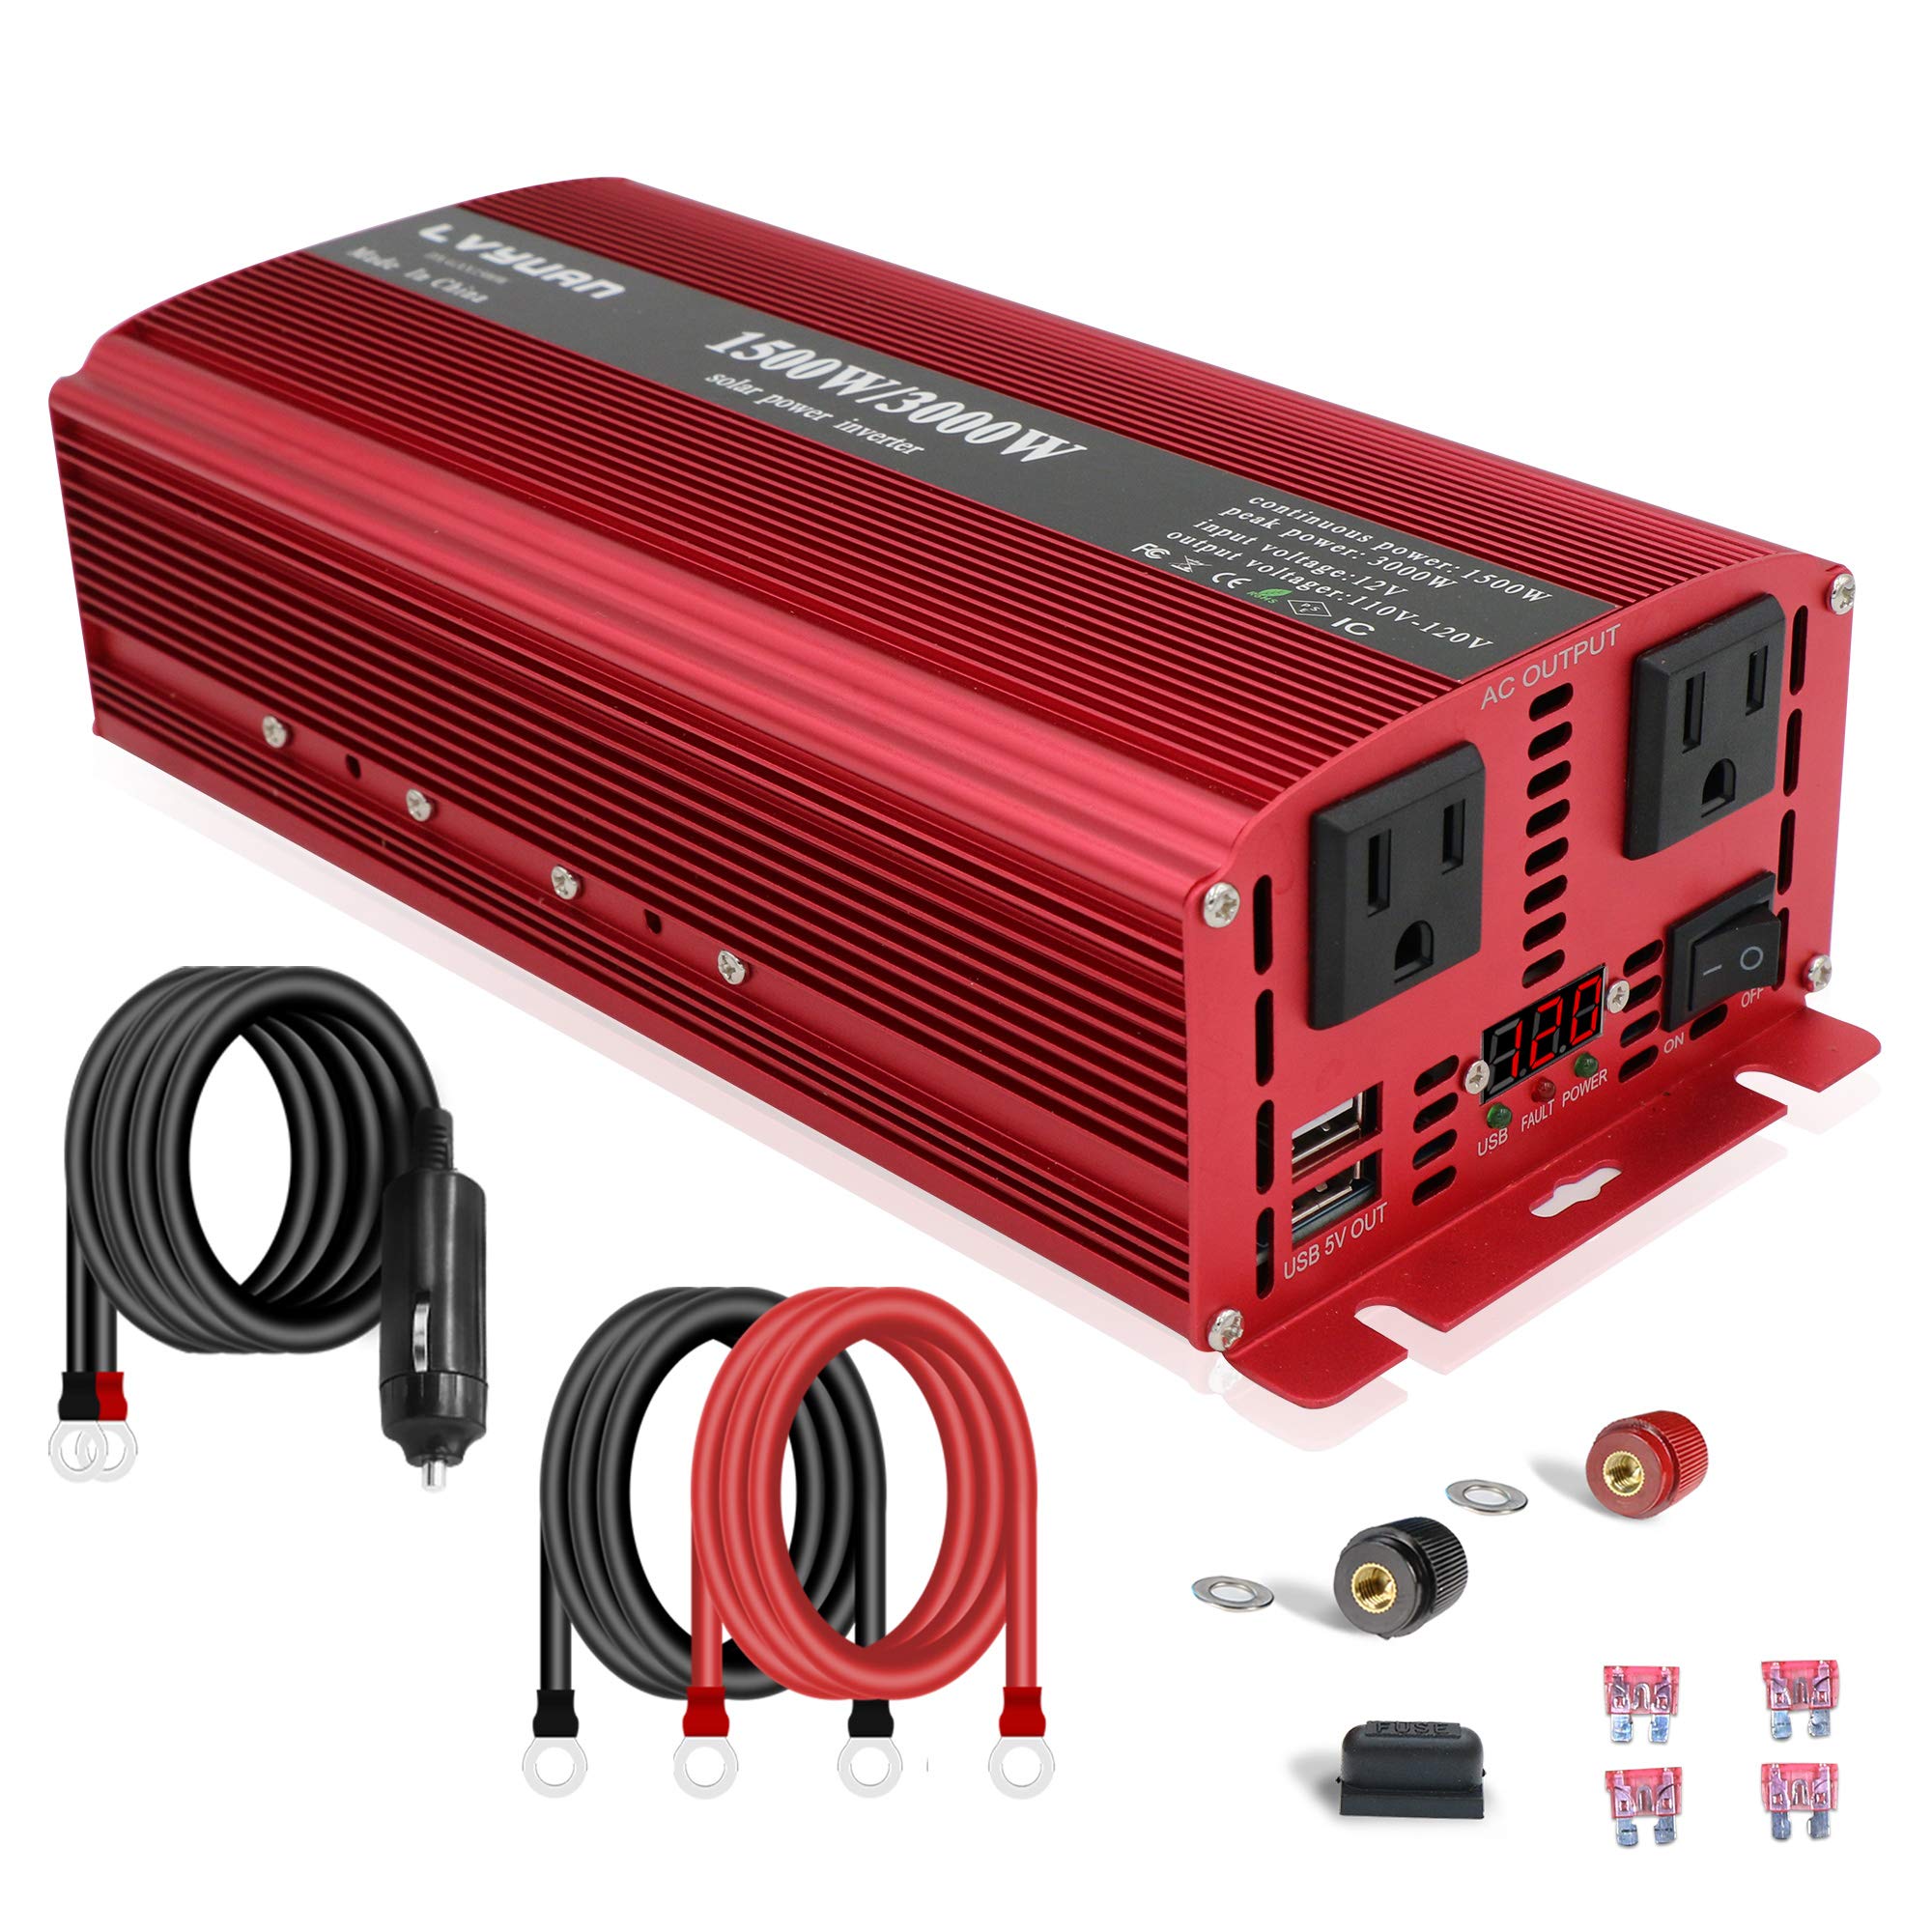 Book Cover LVYUAN 1500W/3000W Power Inverter Dual AC Outlets and Dual USB Charging Ports DC 12V to 110V AC Car 12V Inverter Converter with Digital Display 4 External 40A Fuses for Blenders, vacuums, Power Tools